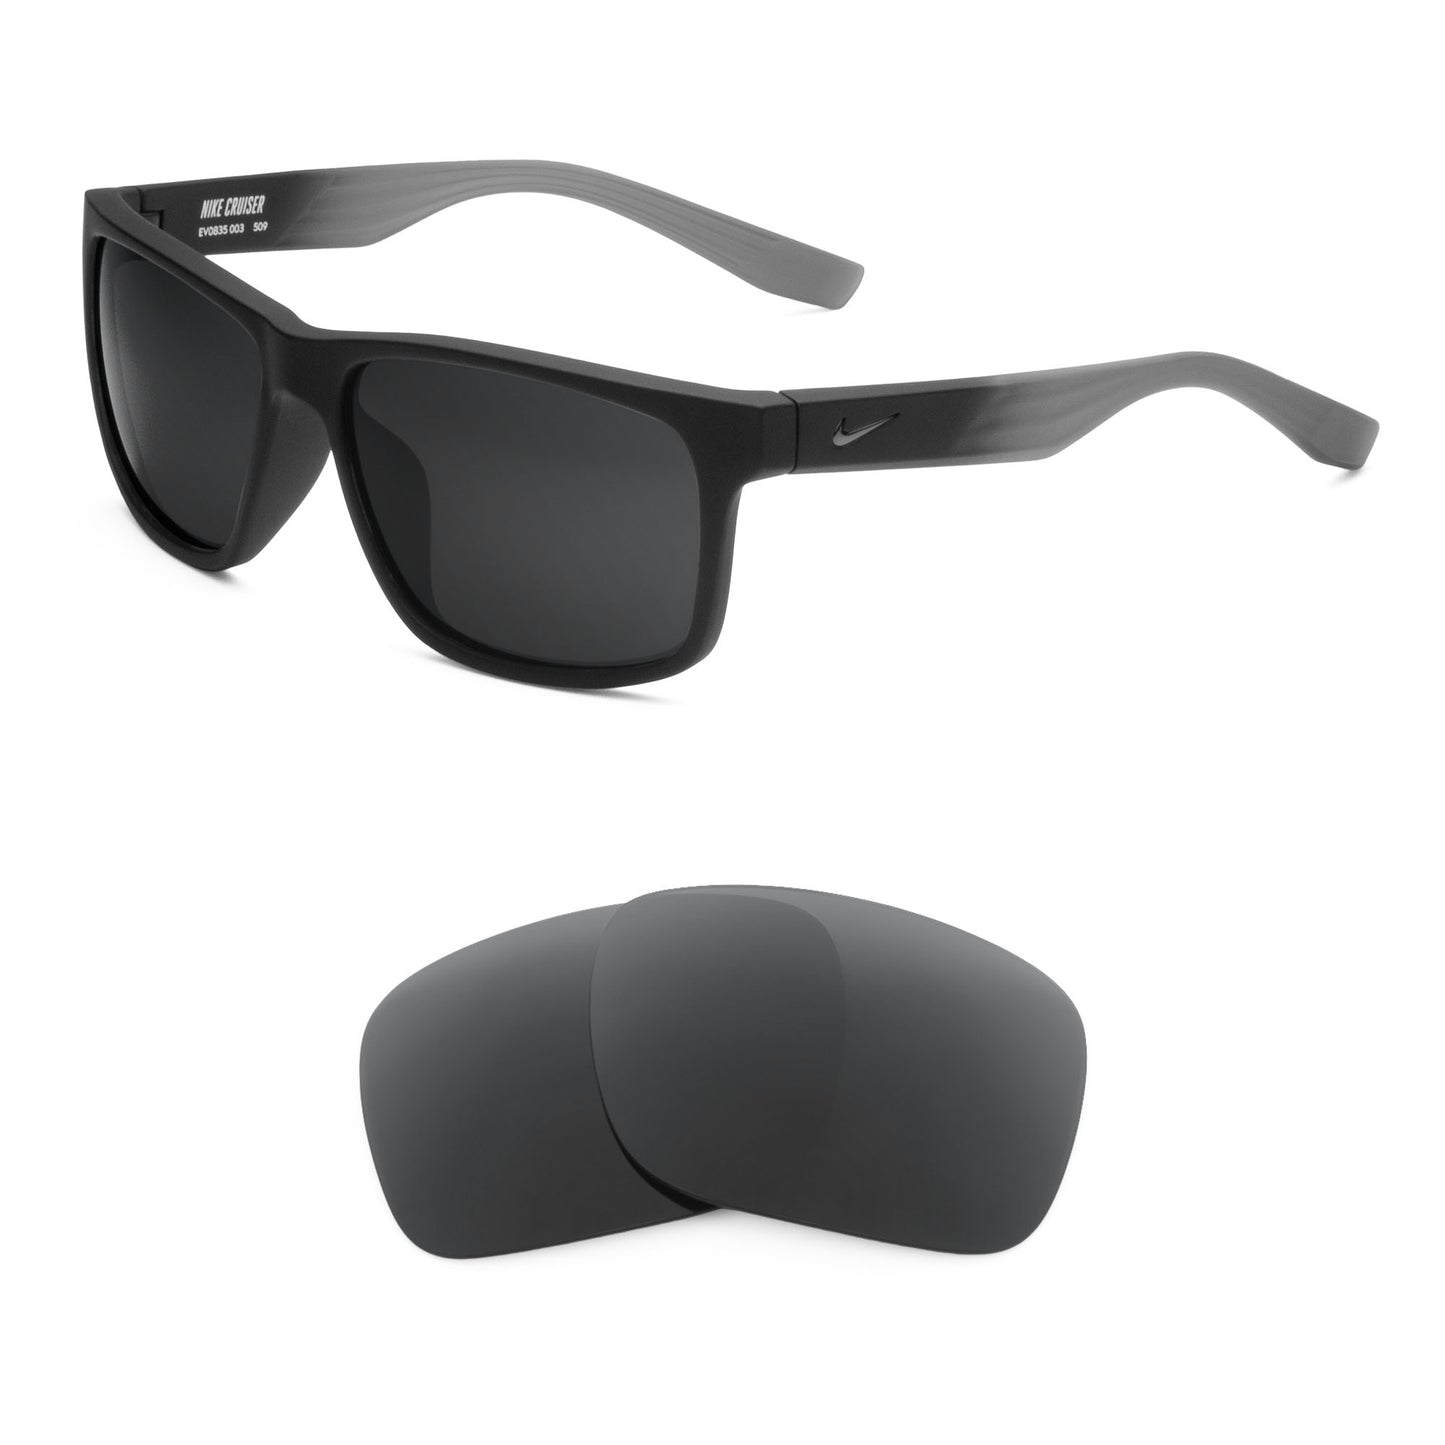 Nike Cruiser R sunglasses with replacement lenses